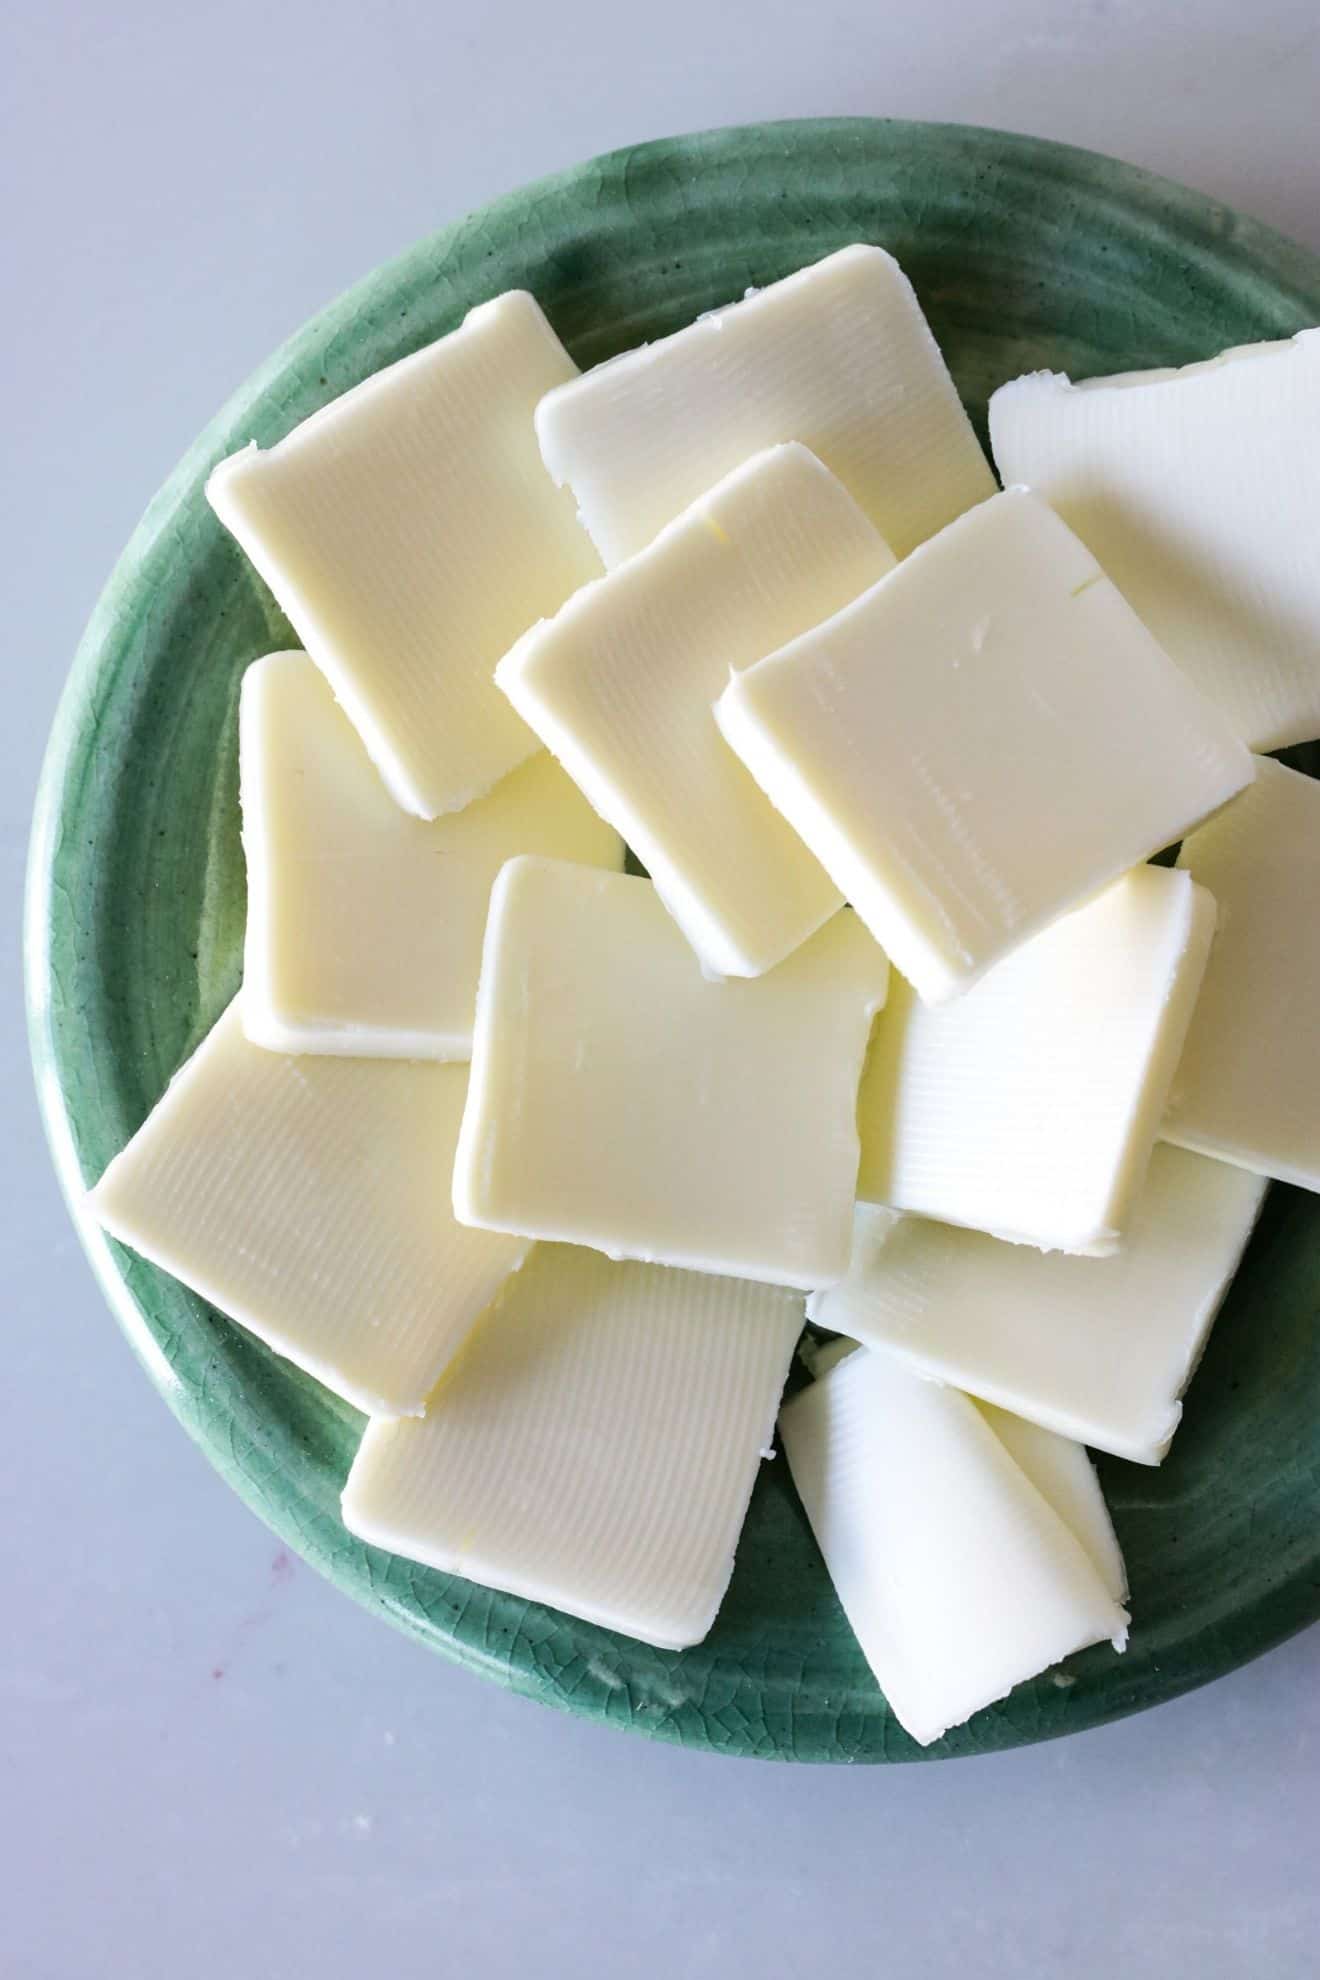 This is an overhead image of a light green plate on a white counter. On the plate is butter cut into squares.